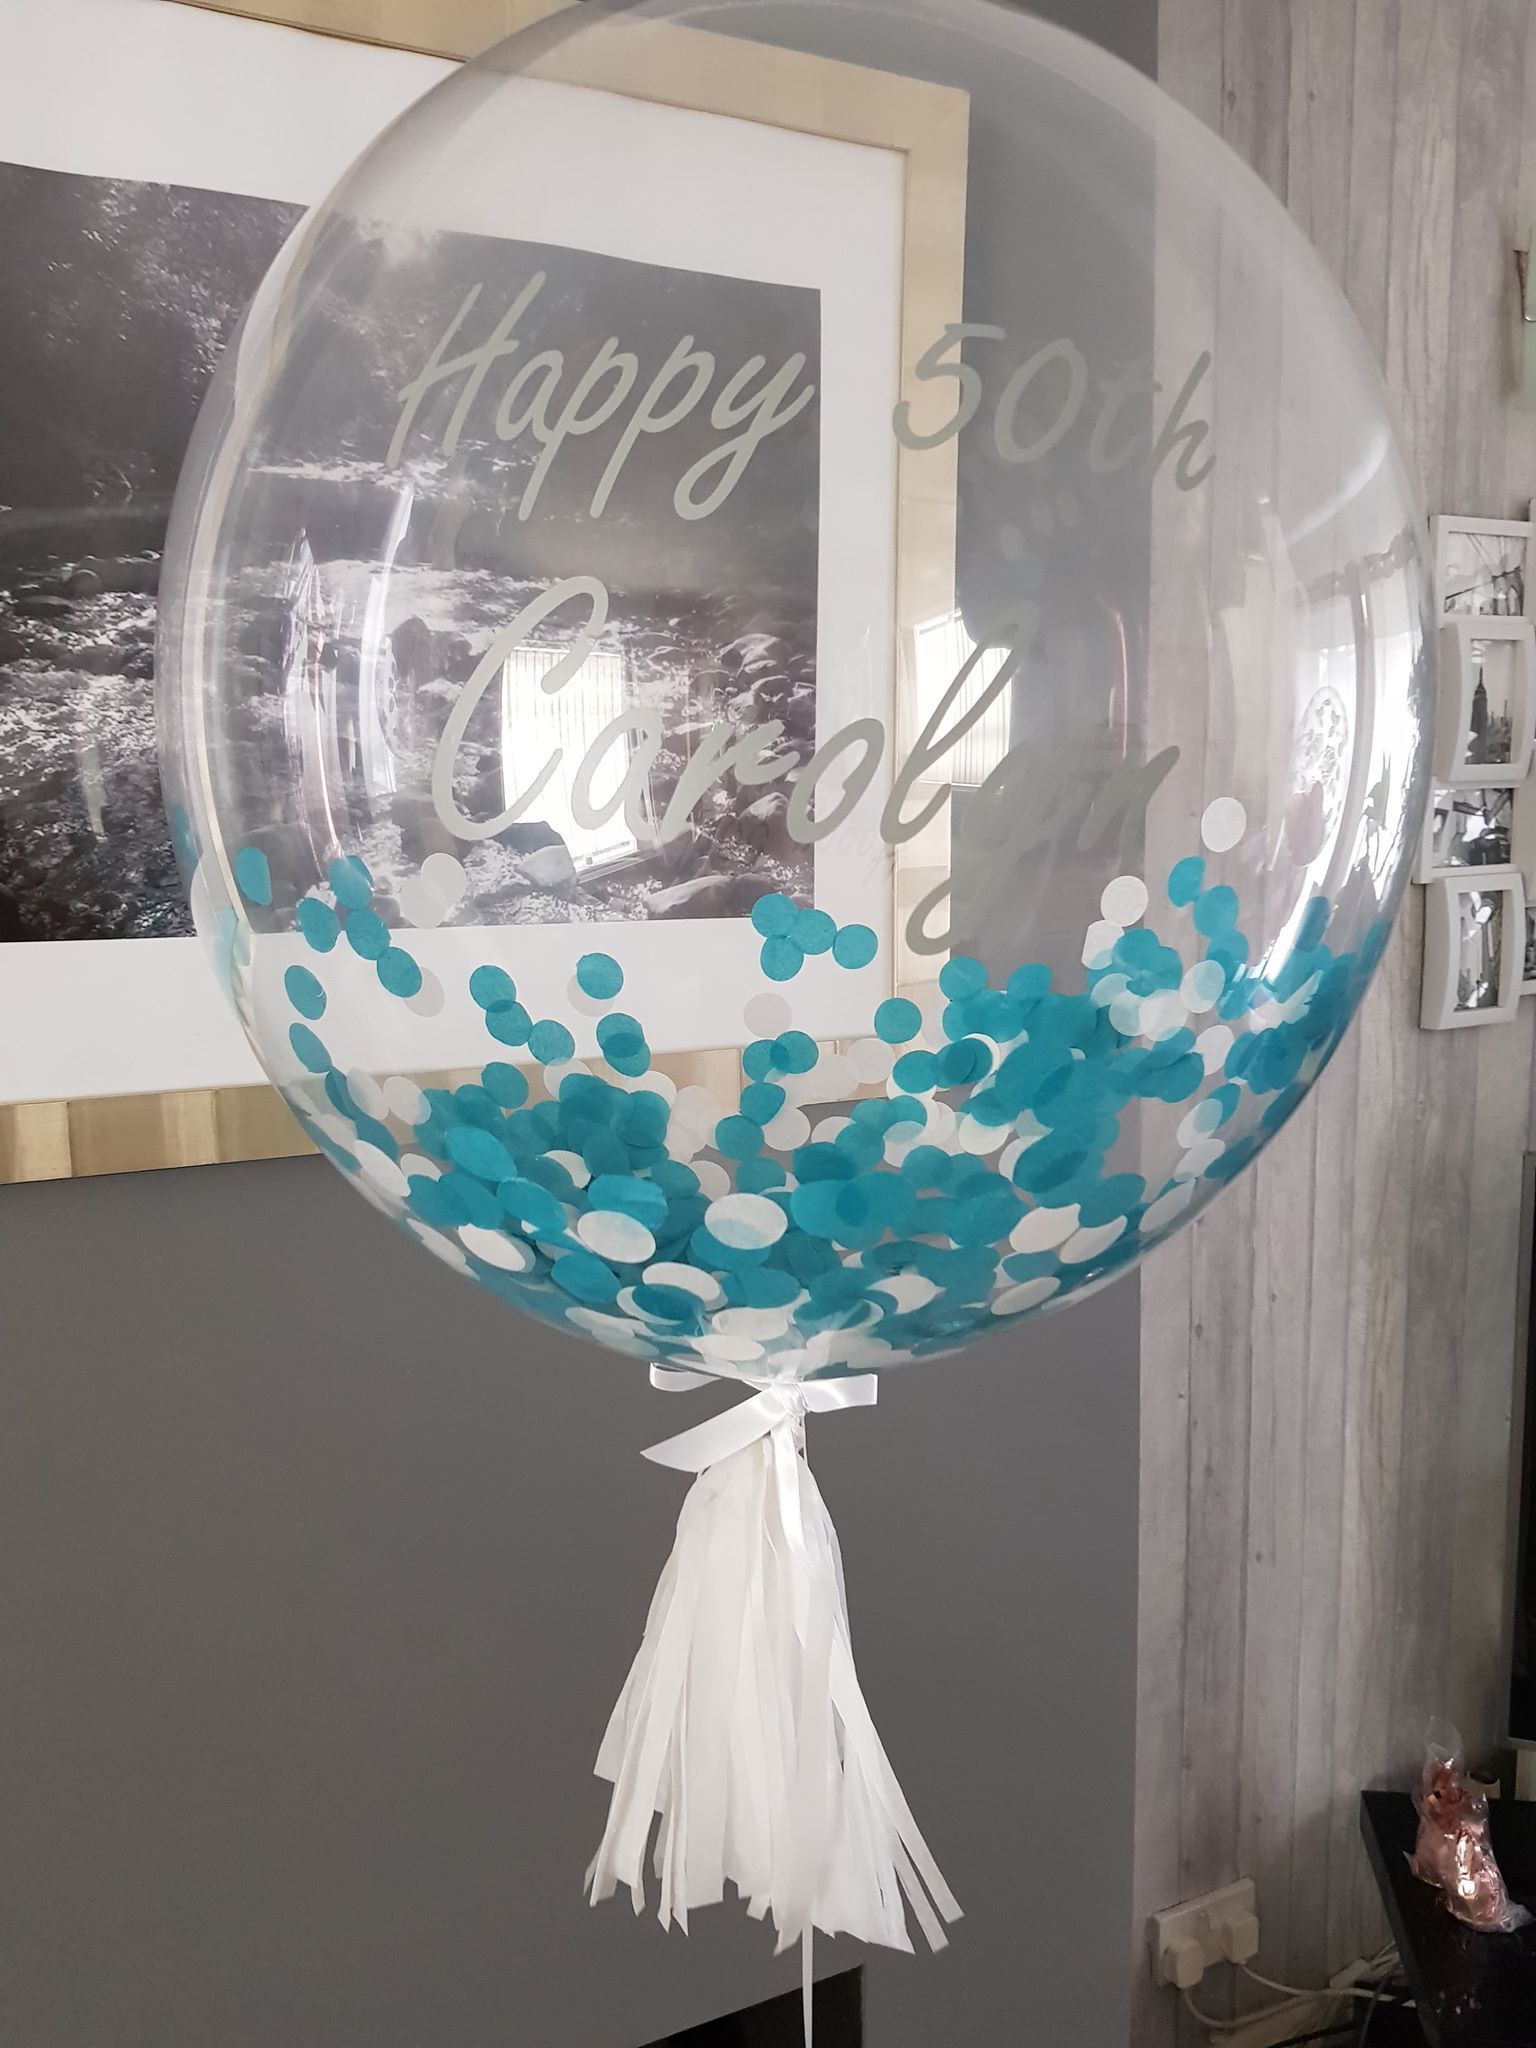 Personalised balloon with blue and white Confetti inside and Silver vynal lettering